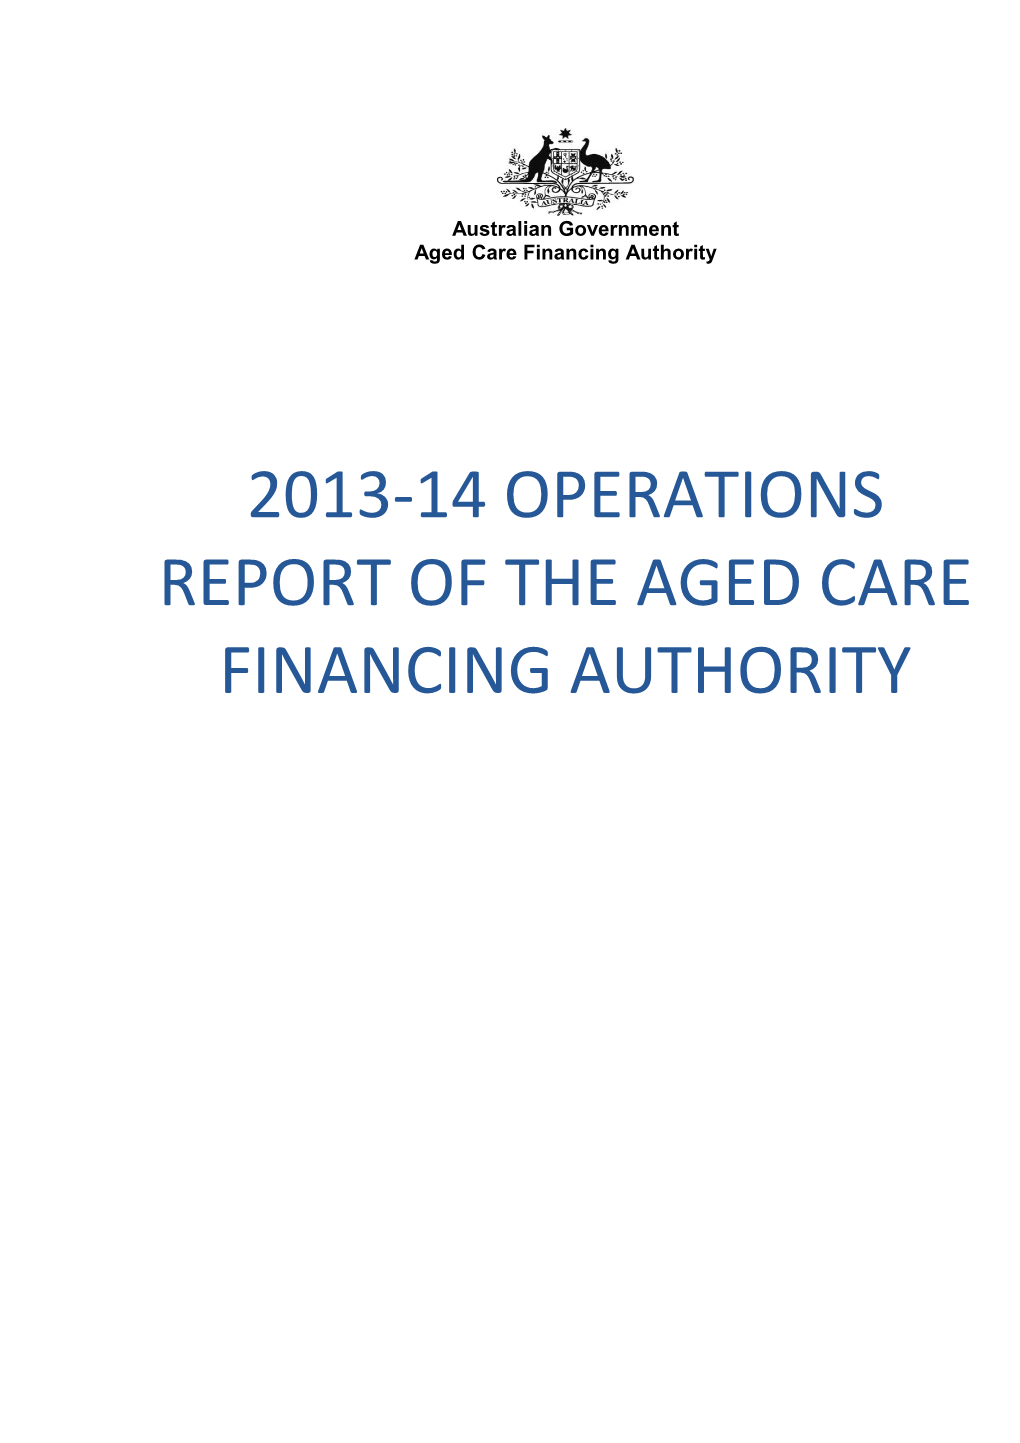 2013-14 Operations Report of the Aged Care Financing Authority